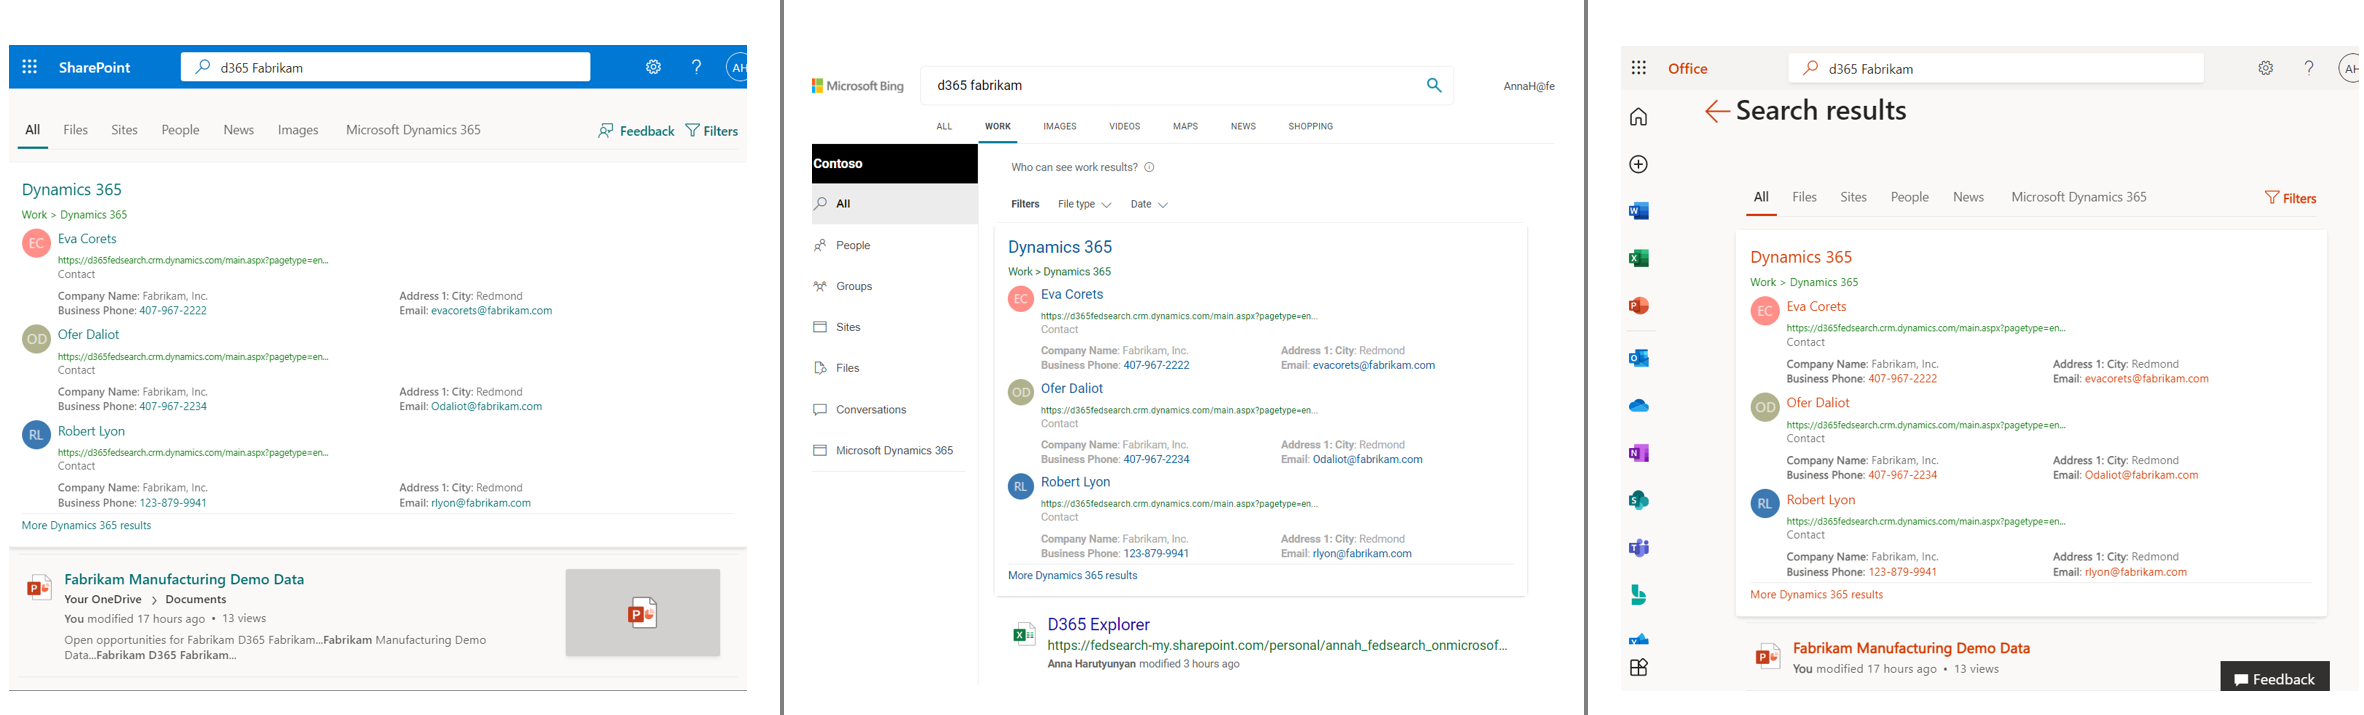 Screenshot of Dynamics 365 answers on SharePoint, Bing, and Office.